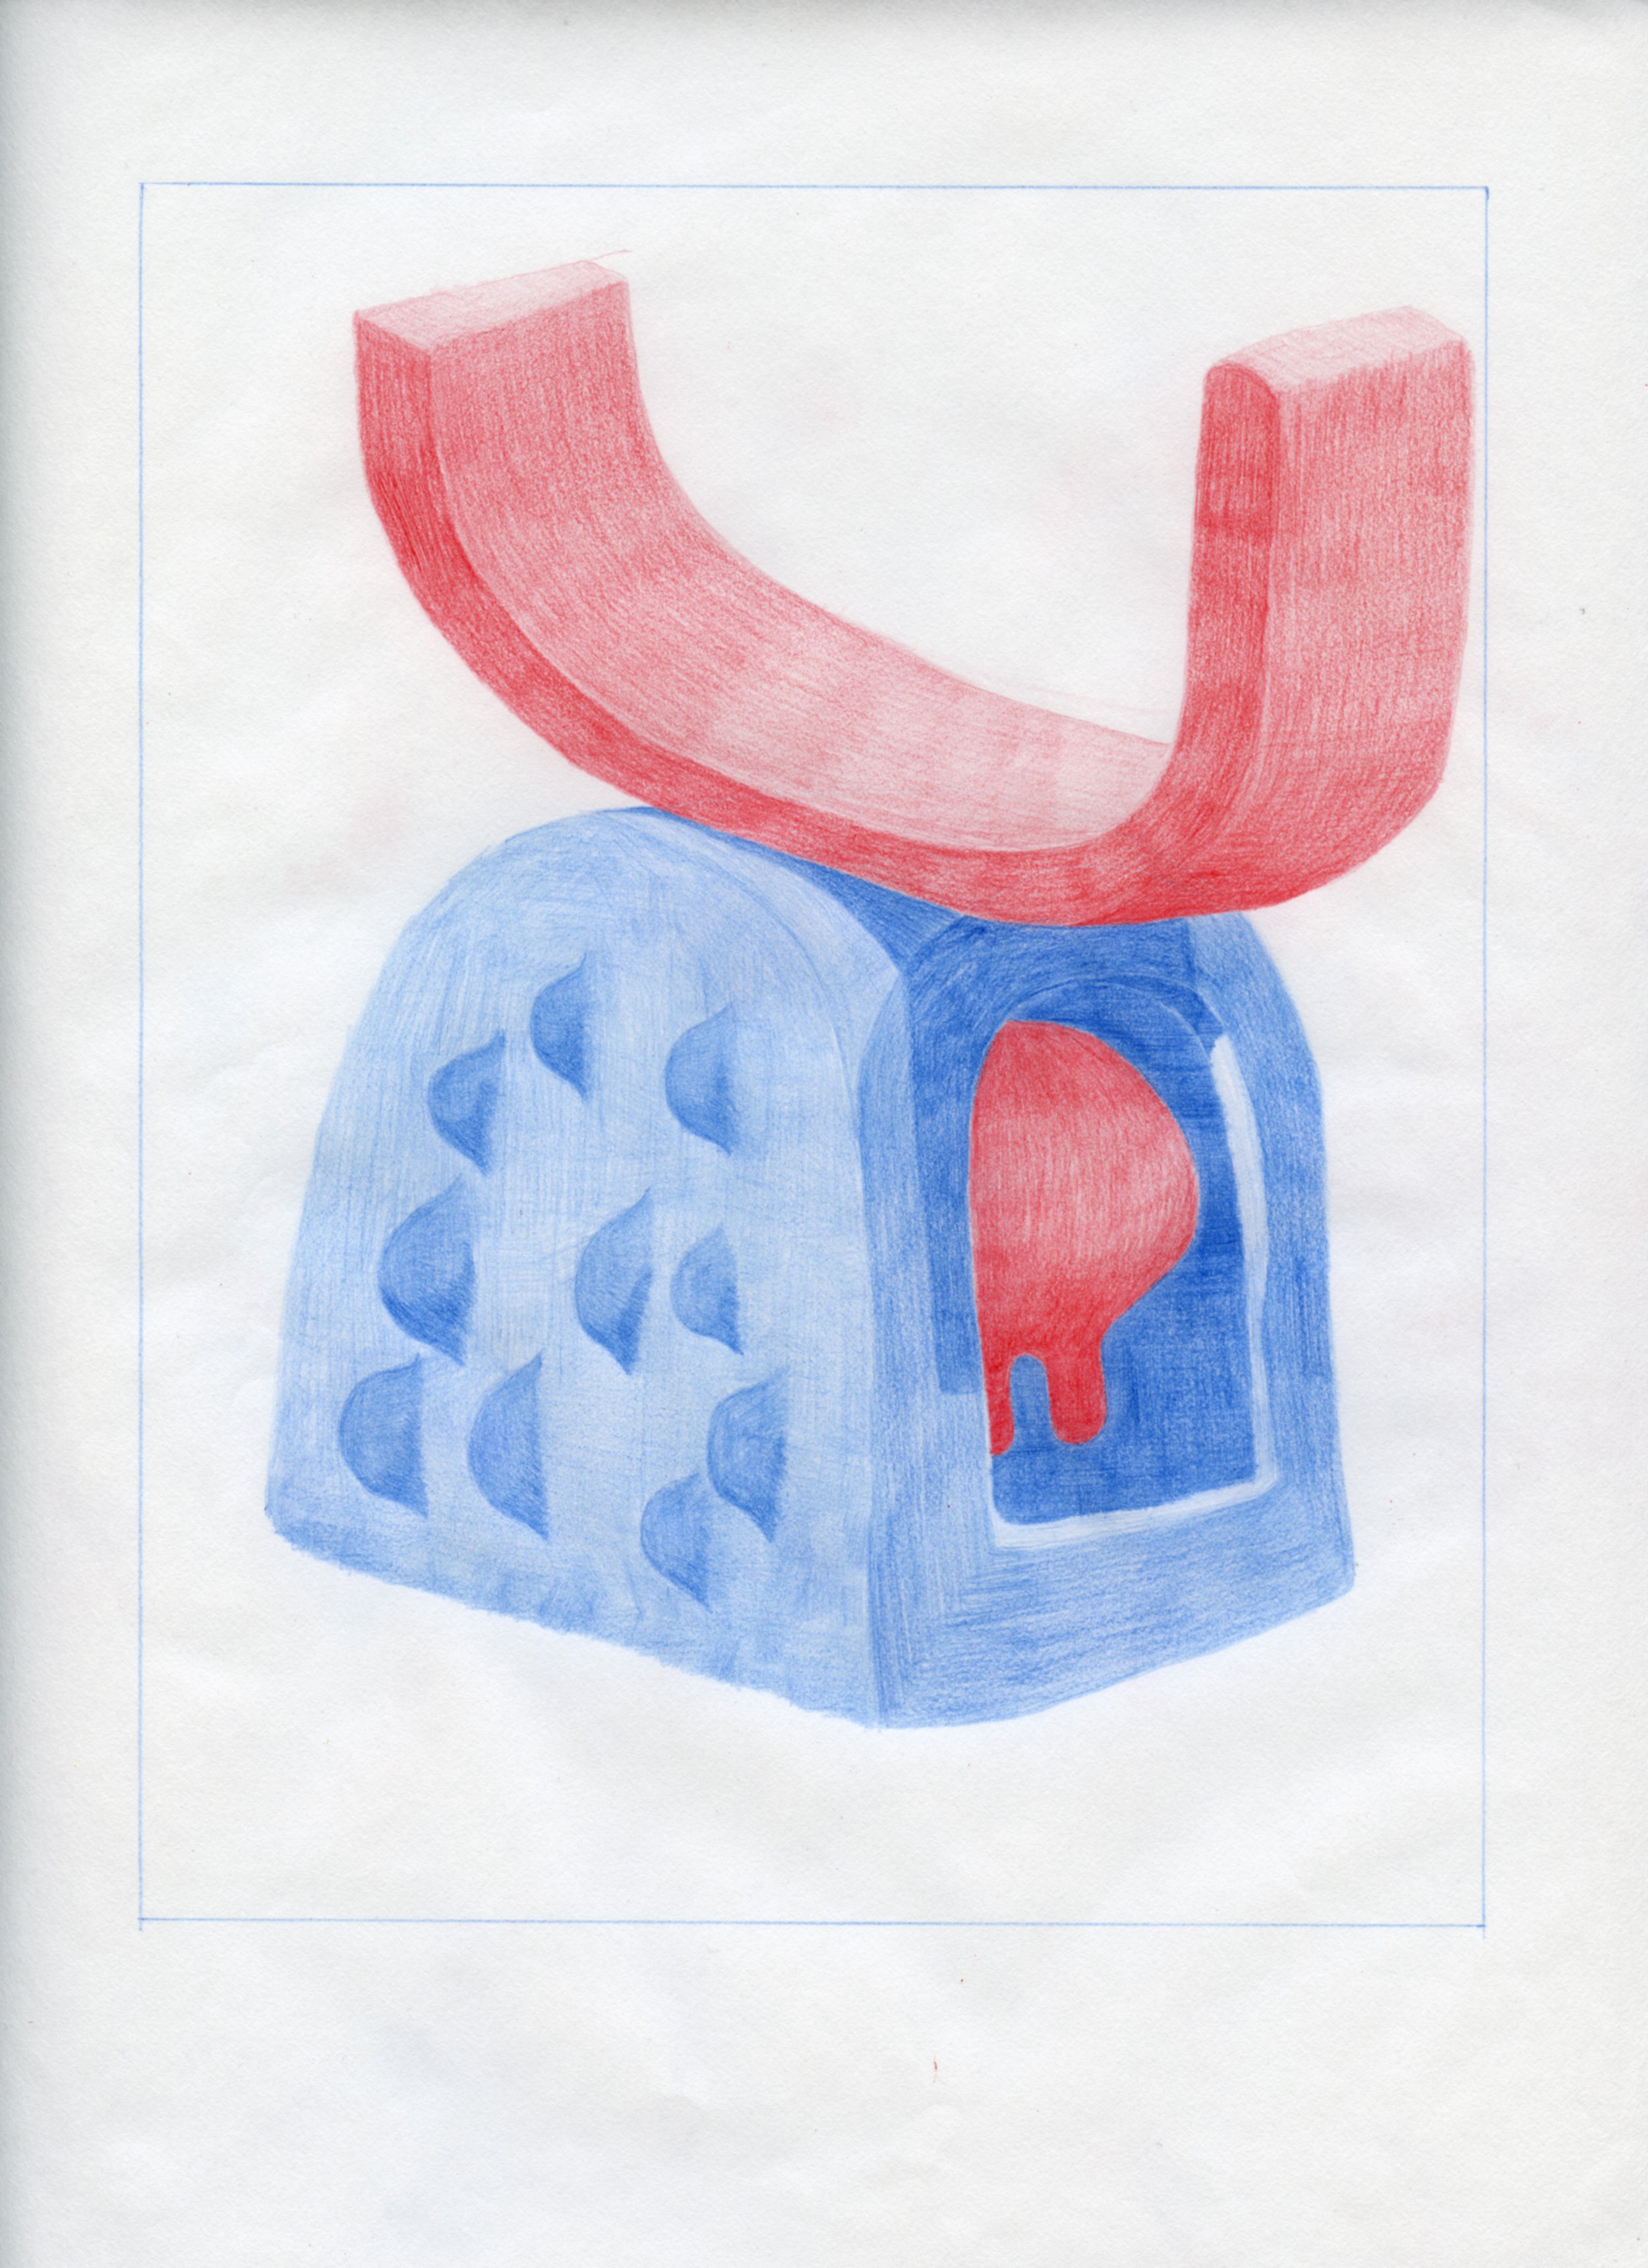  Workplace Drawing #11, 2021, Red and Blue Graphite on Bond Paper, 9”x 12”. 